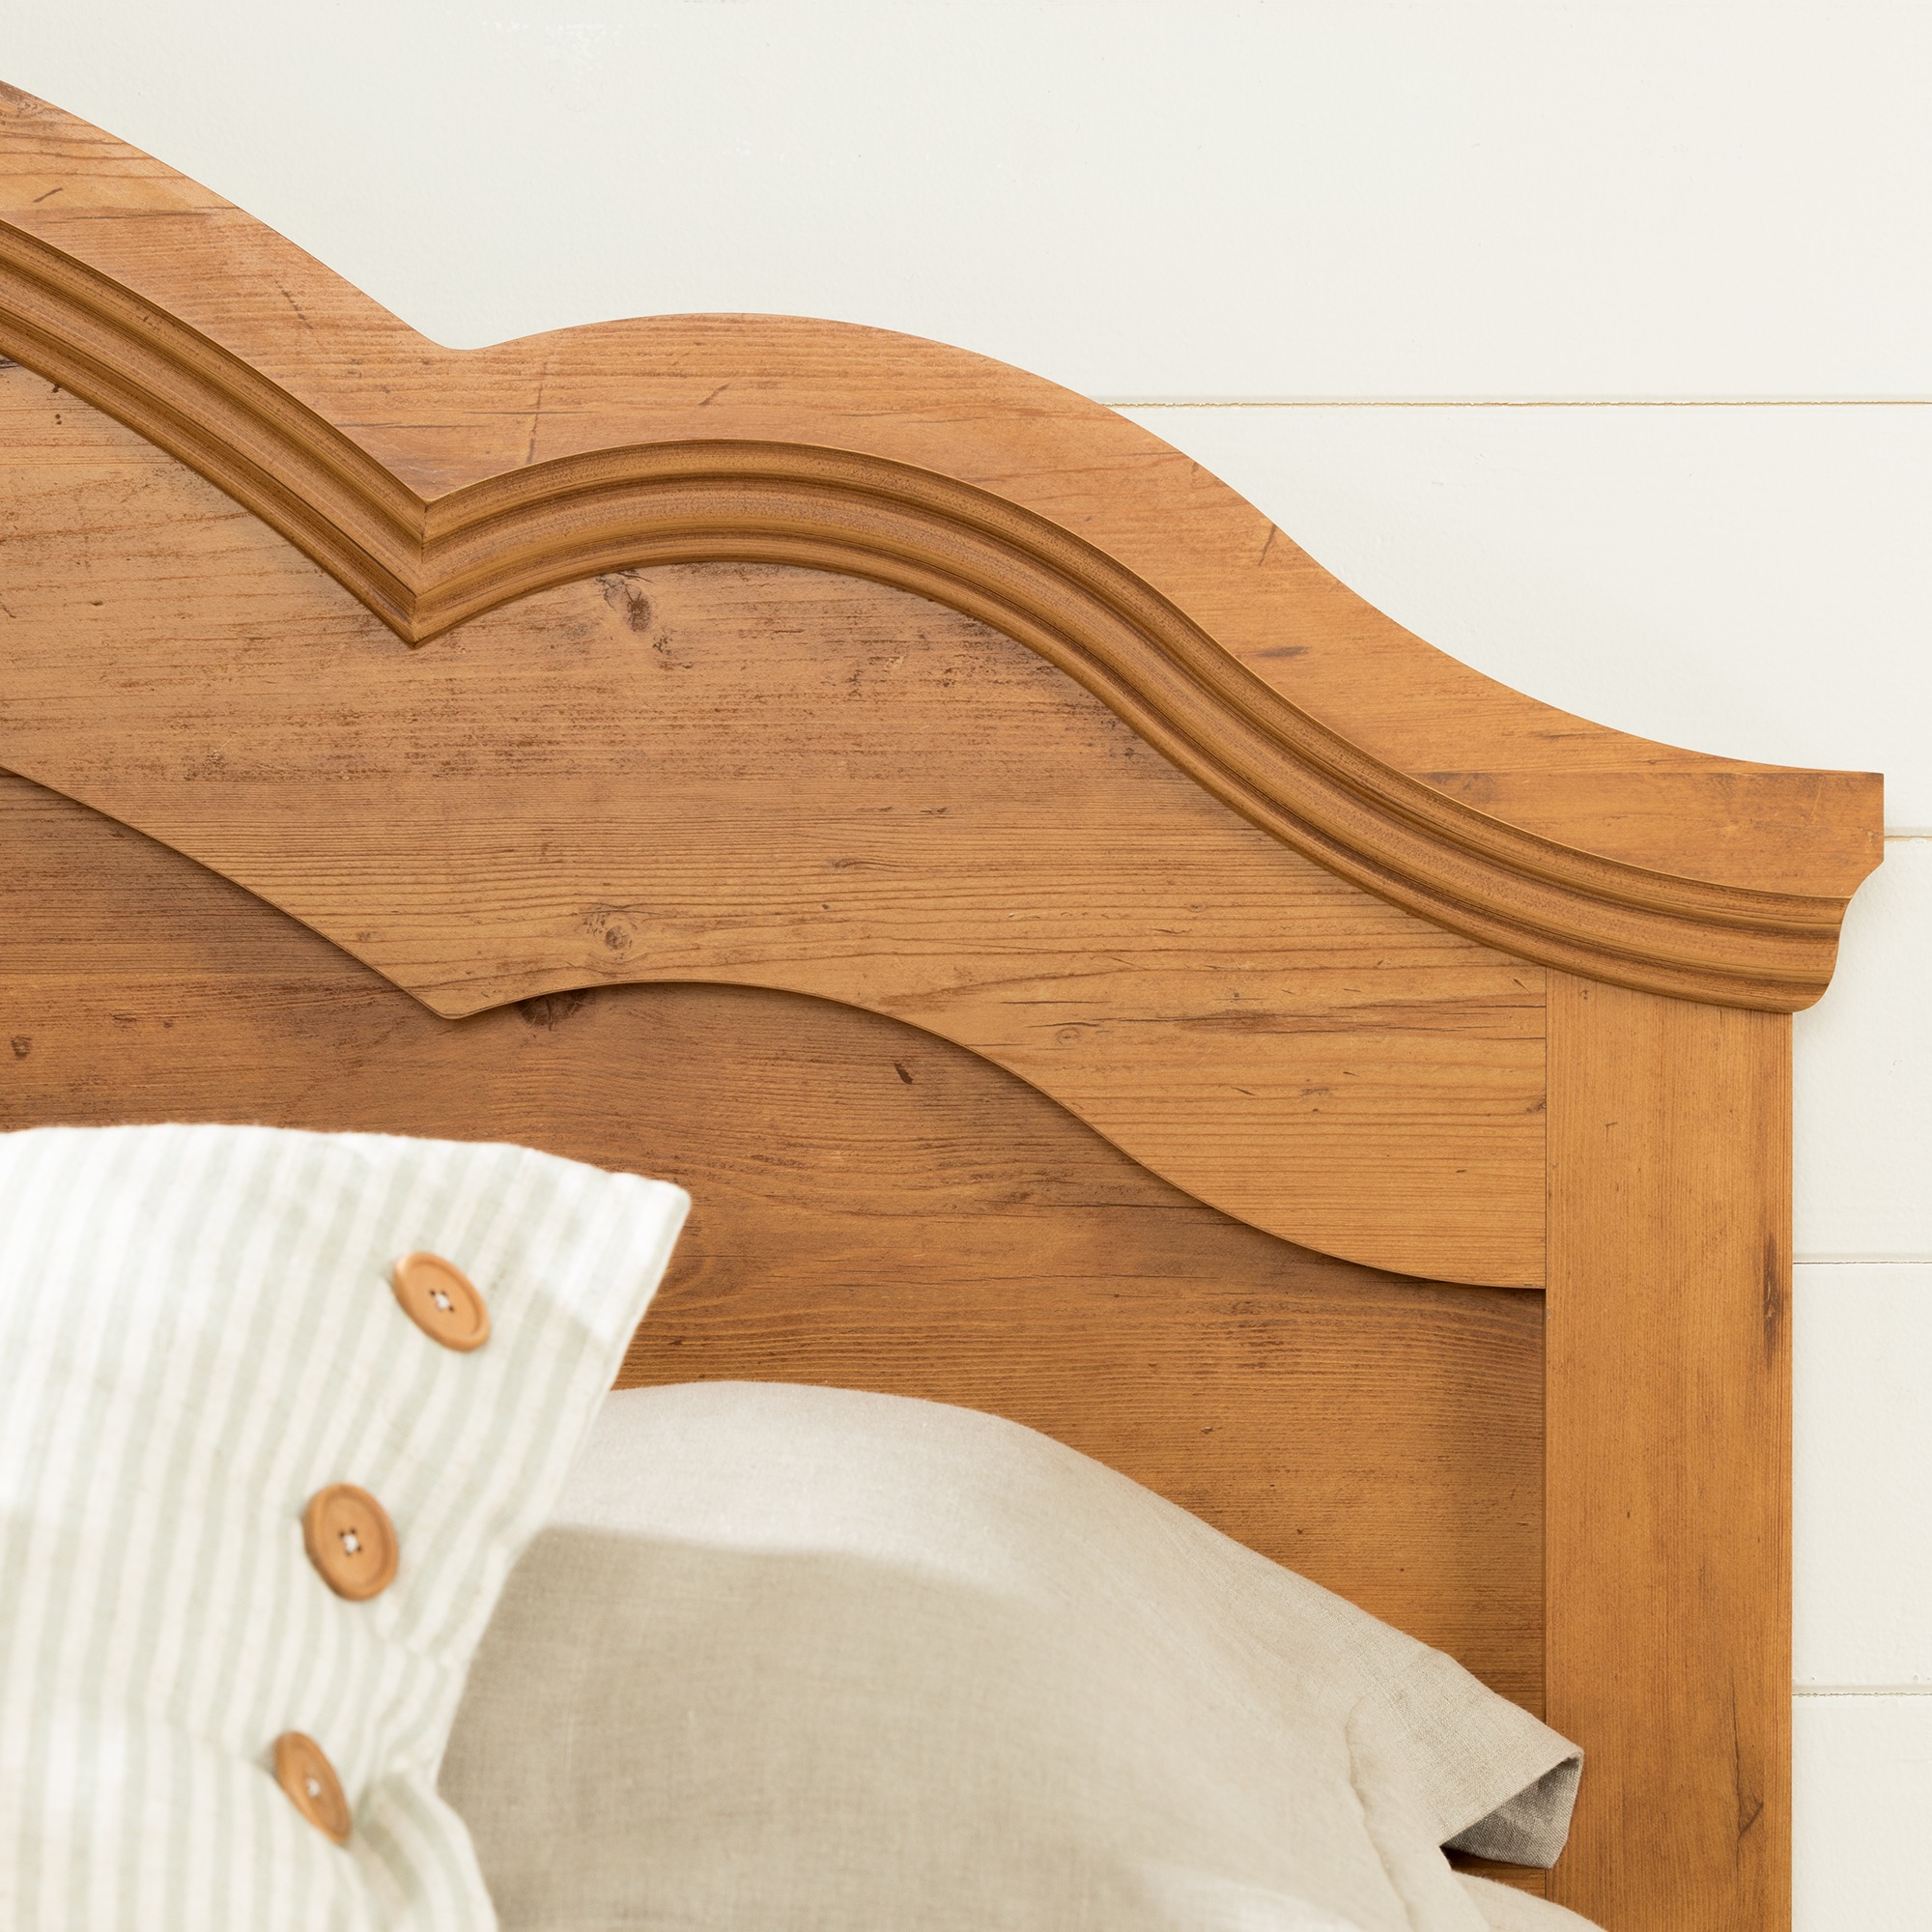 South Shore Prairie Full/Queen Headboard, Country Pine - image 3 of 7